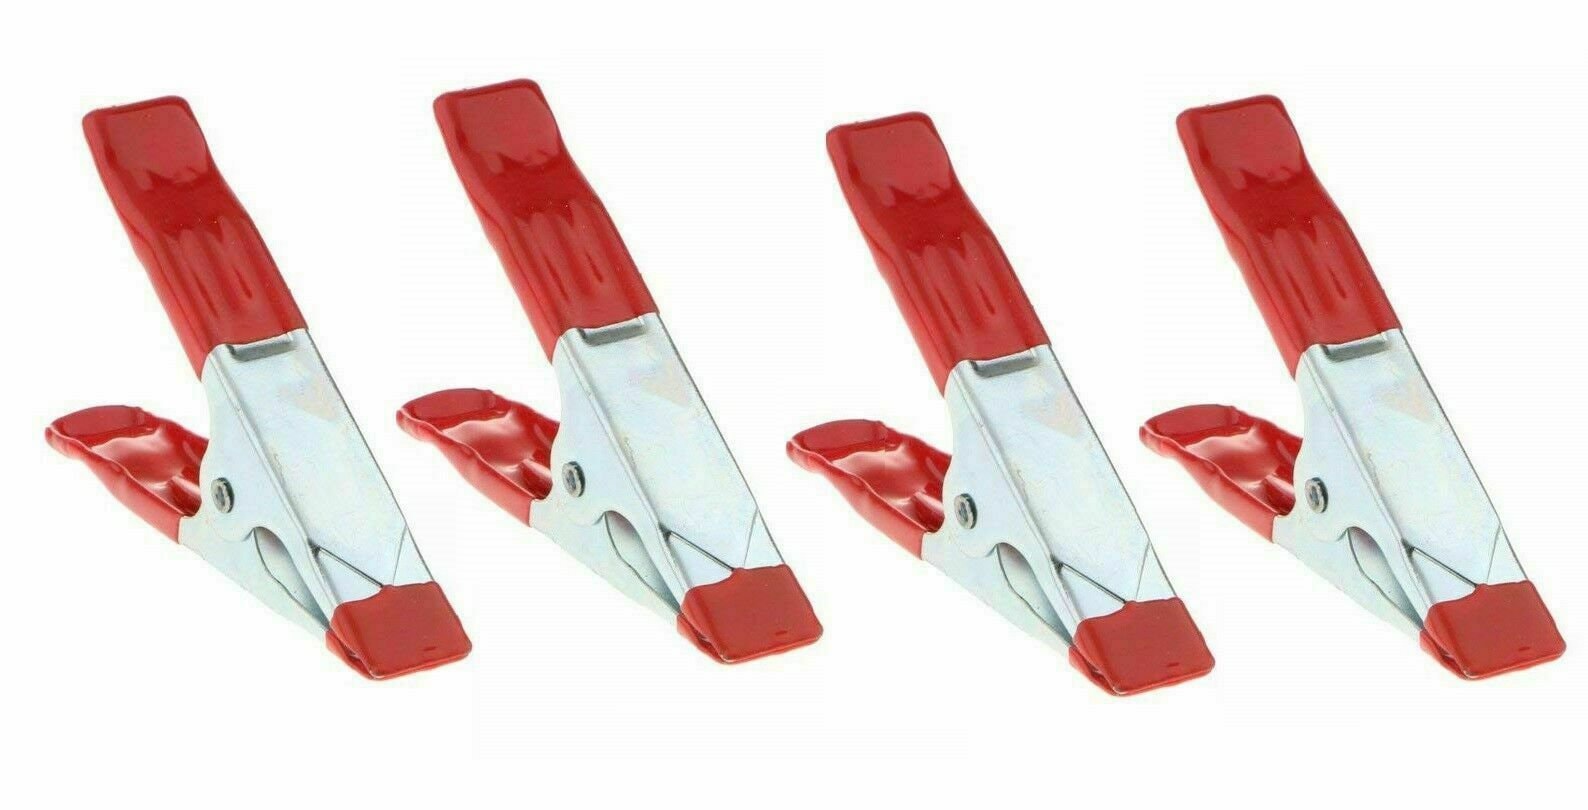 Details about   Large 4'' 6" Metal Strong SPRING CLAMPS Woodworking Clips PVC Coated Ends UK 